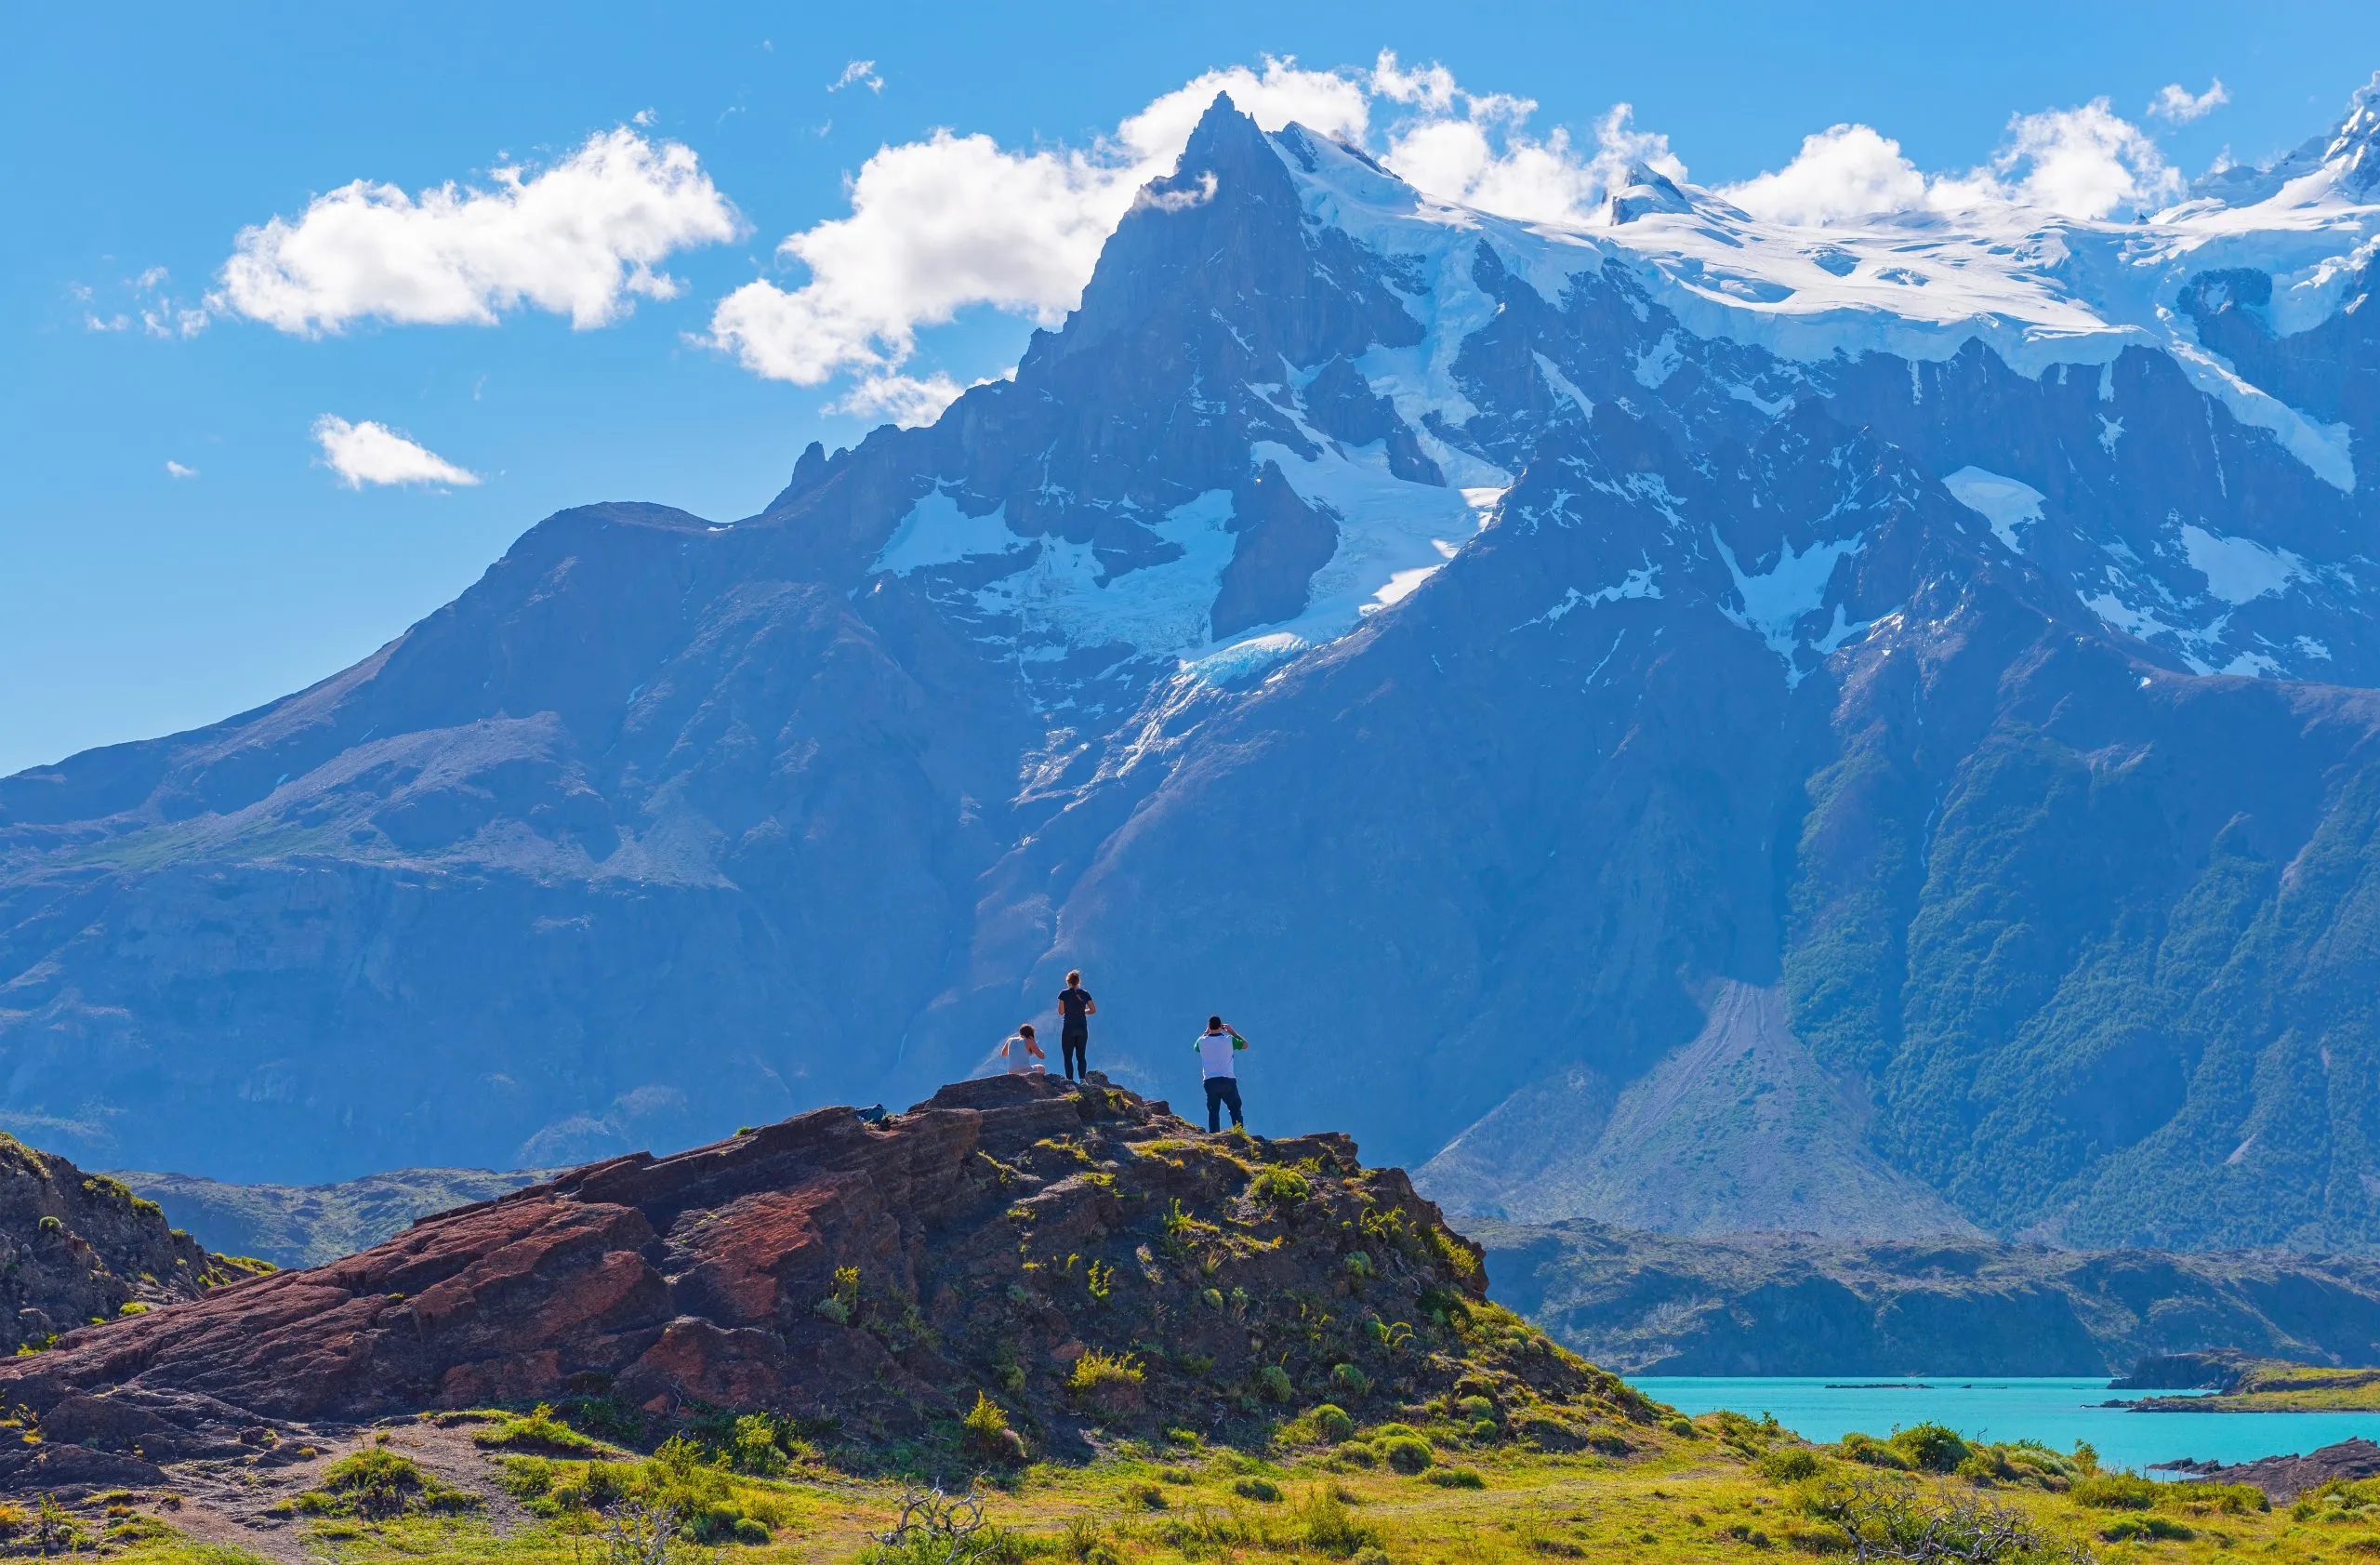 A couple of tourists / backpackers watching at the Cuernos del Paine peaks in the Torres del Paine national park in Patagonia, Chile.